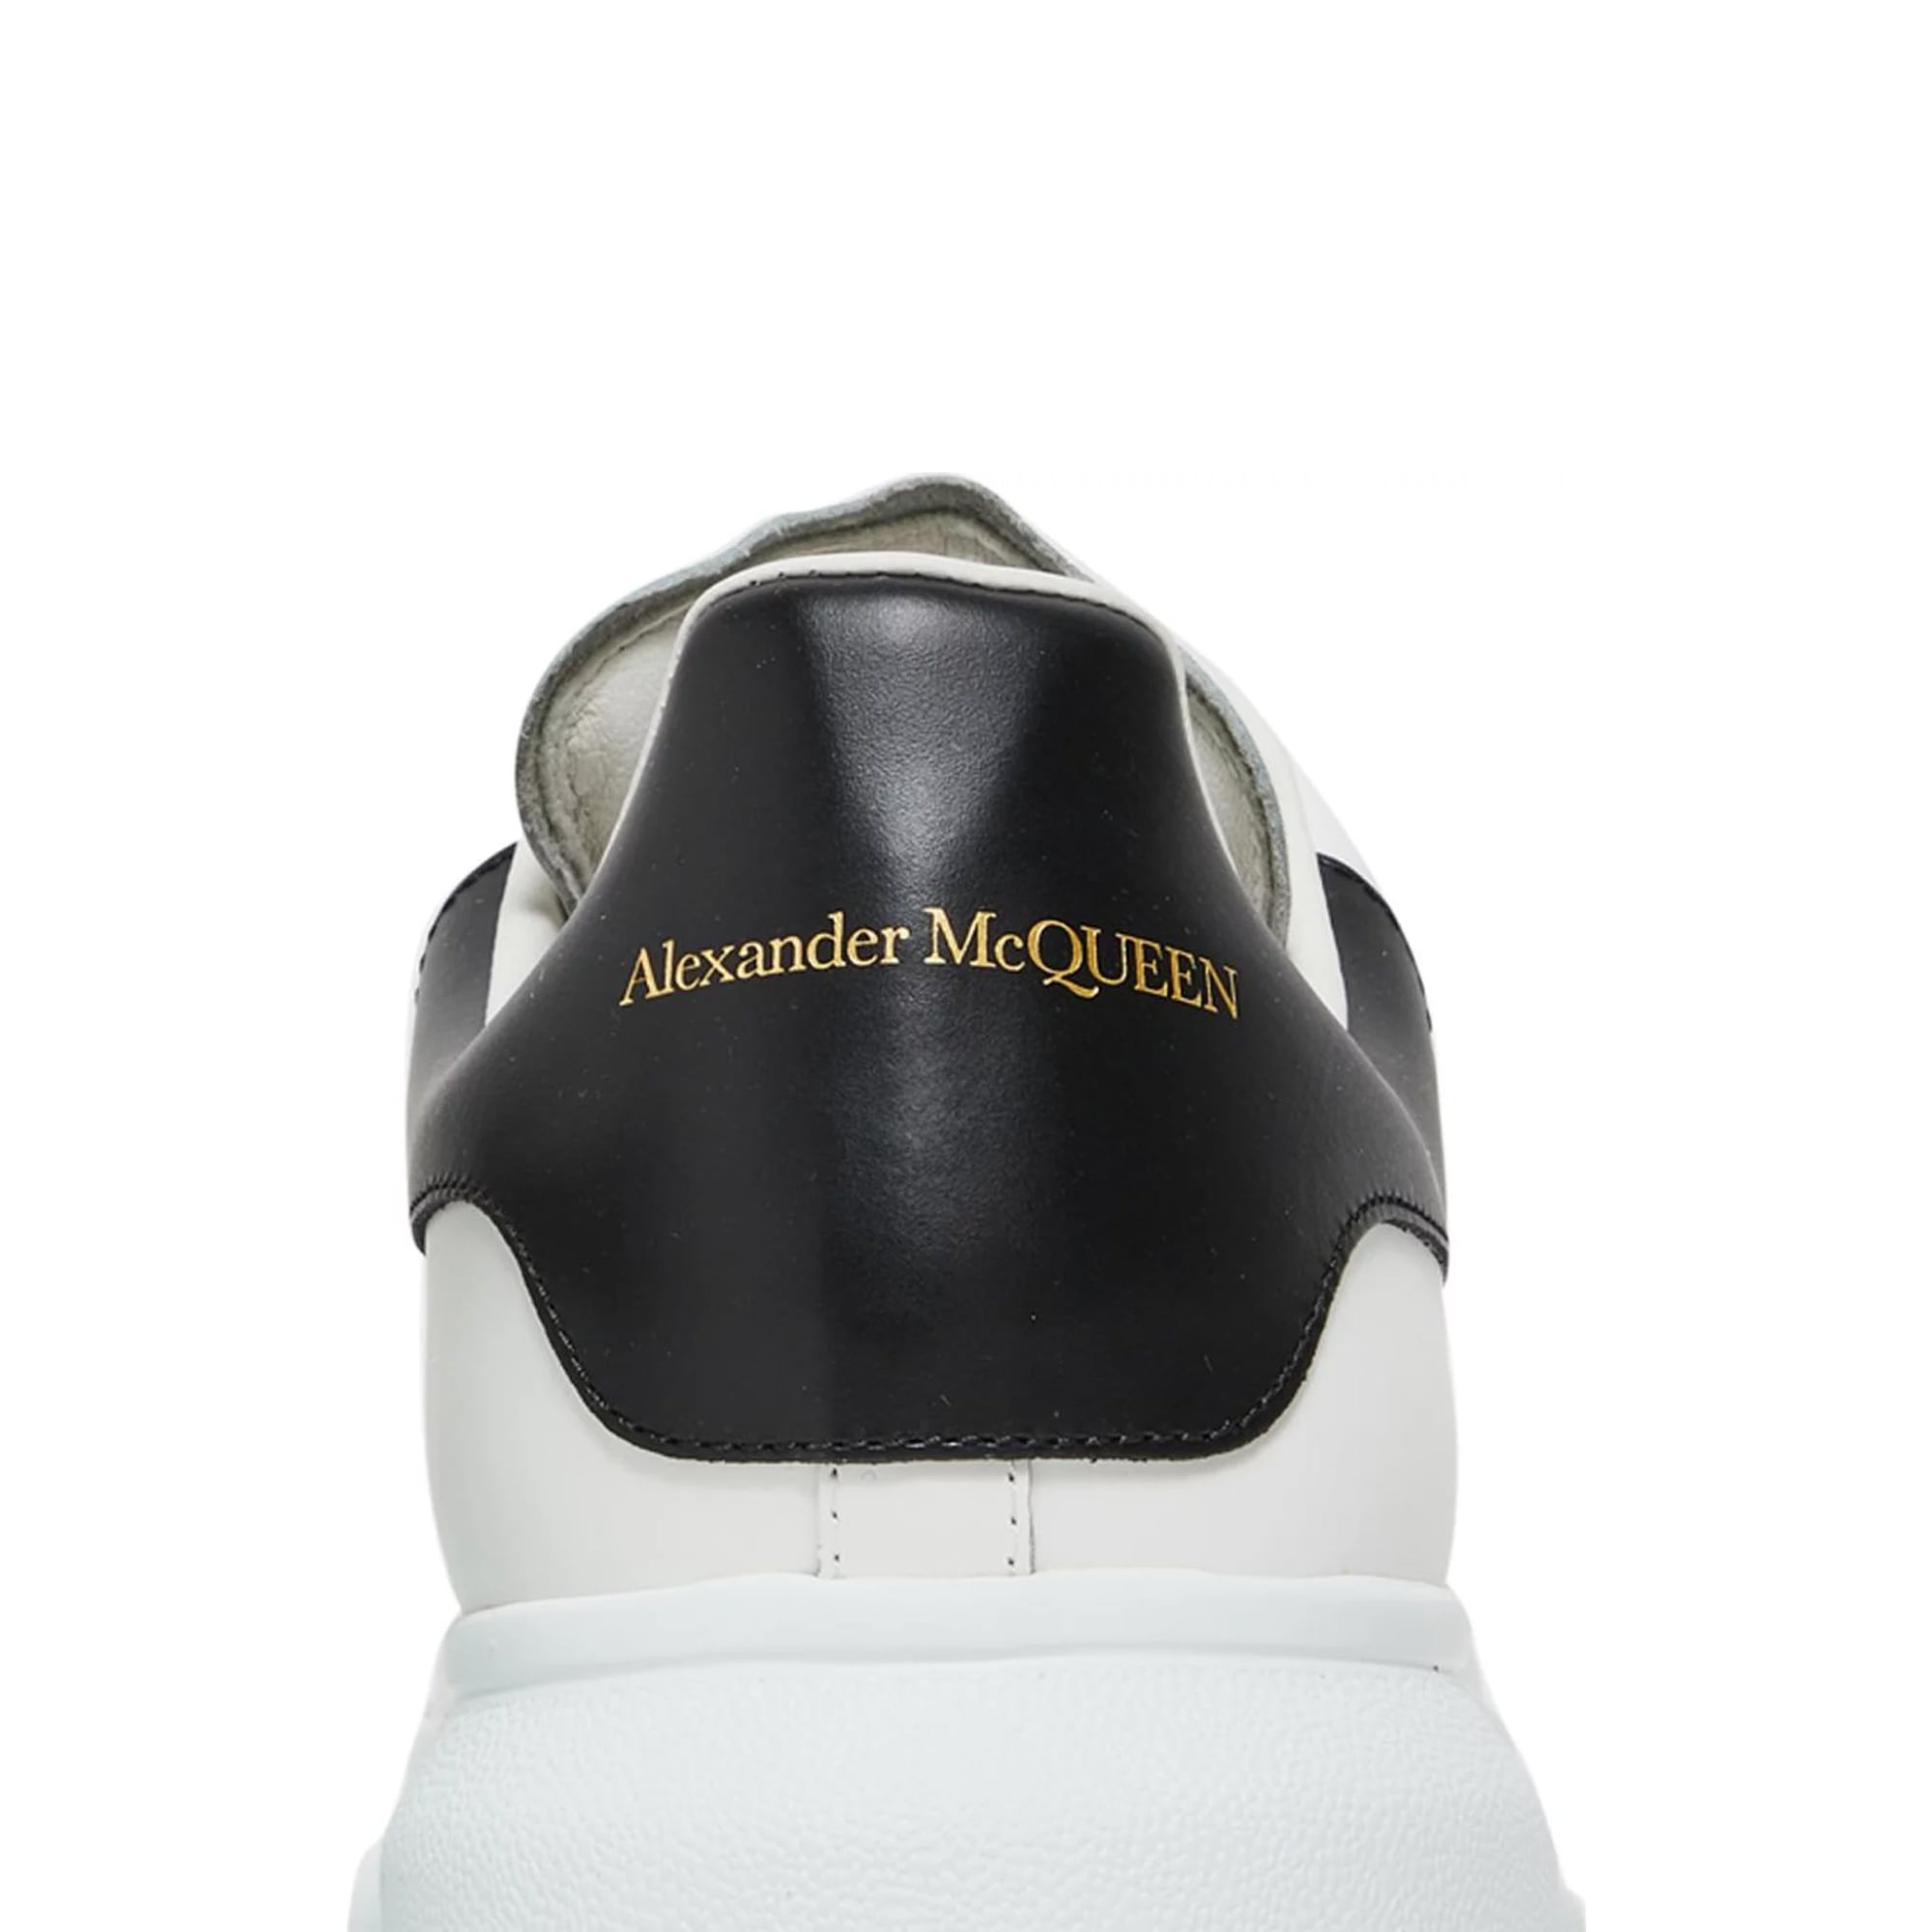 Alexander McQueen leather logo-print lace-up sneakers - Joseph